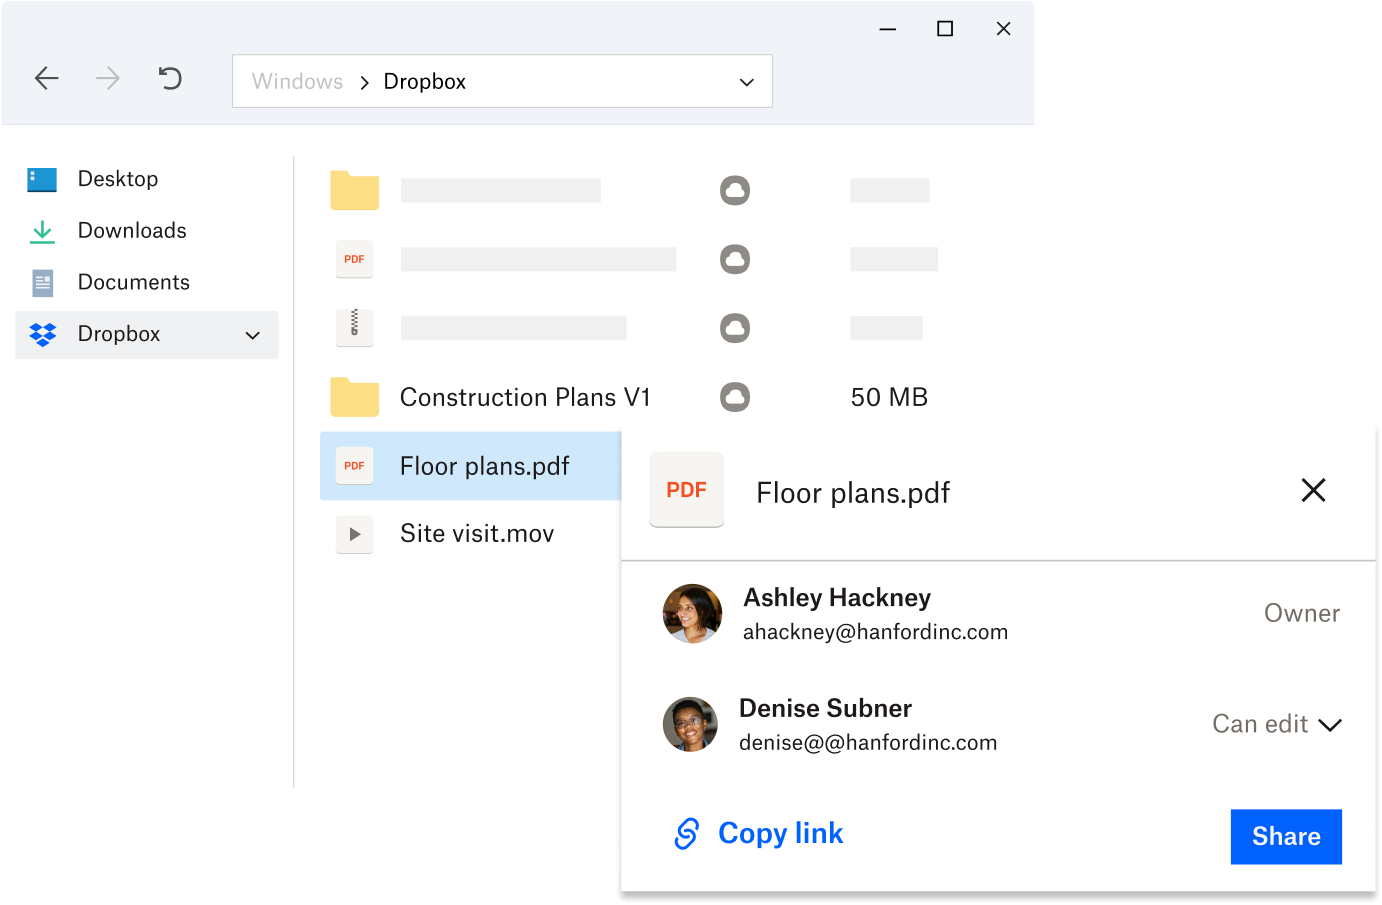 A user’s Dropbox folder shown on their mobile phone, their desktop, and on the web. There are arrows between each of them indicating that the surfaces sync together.